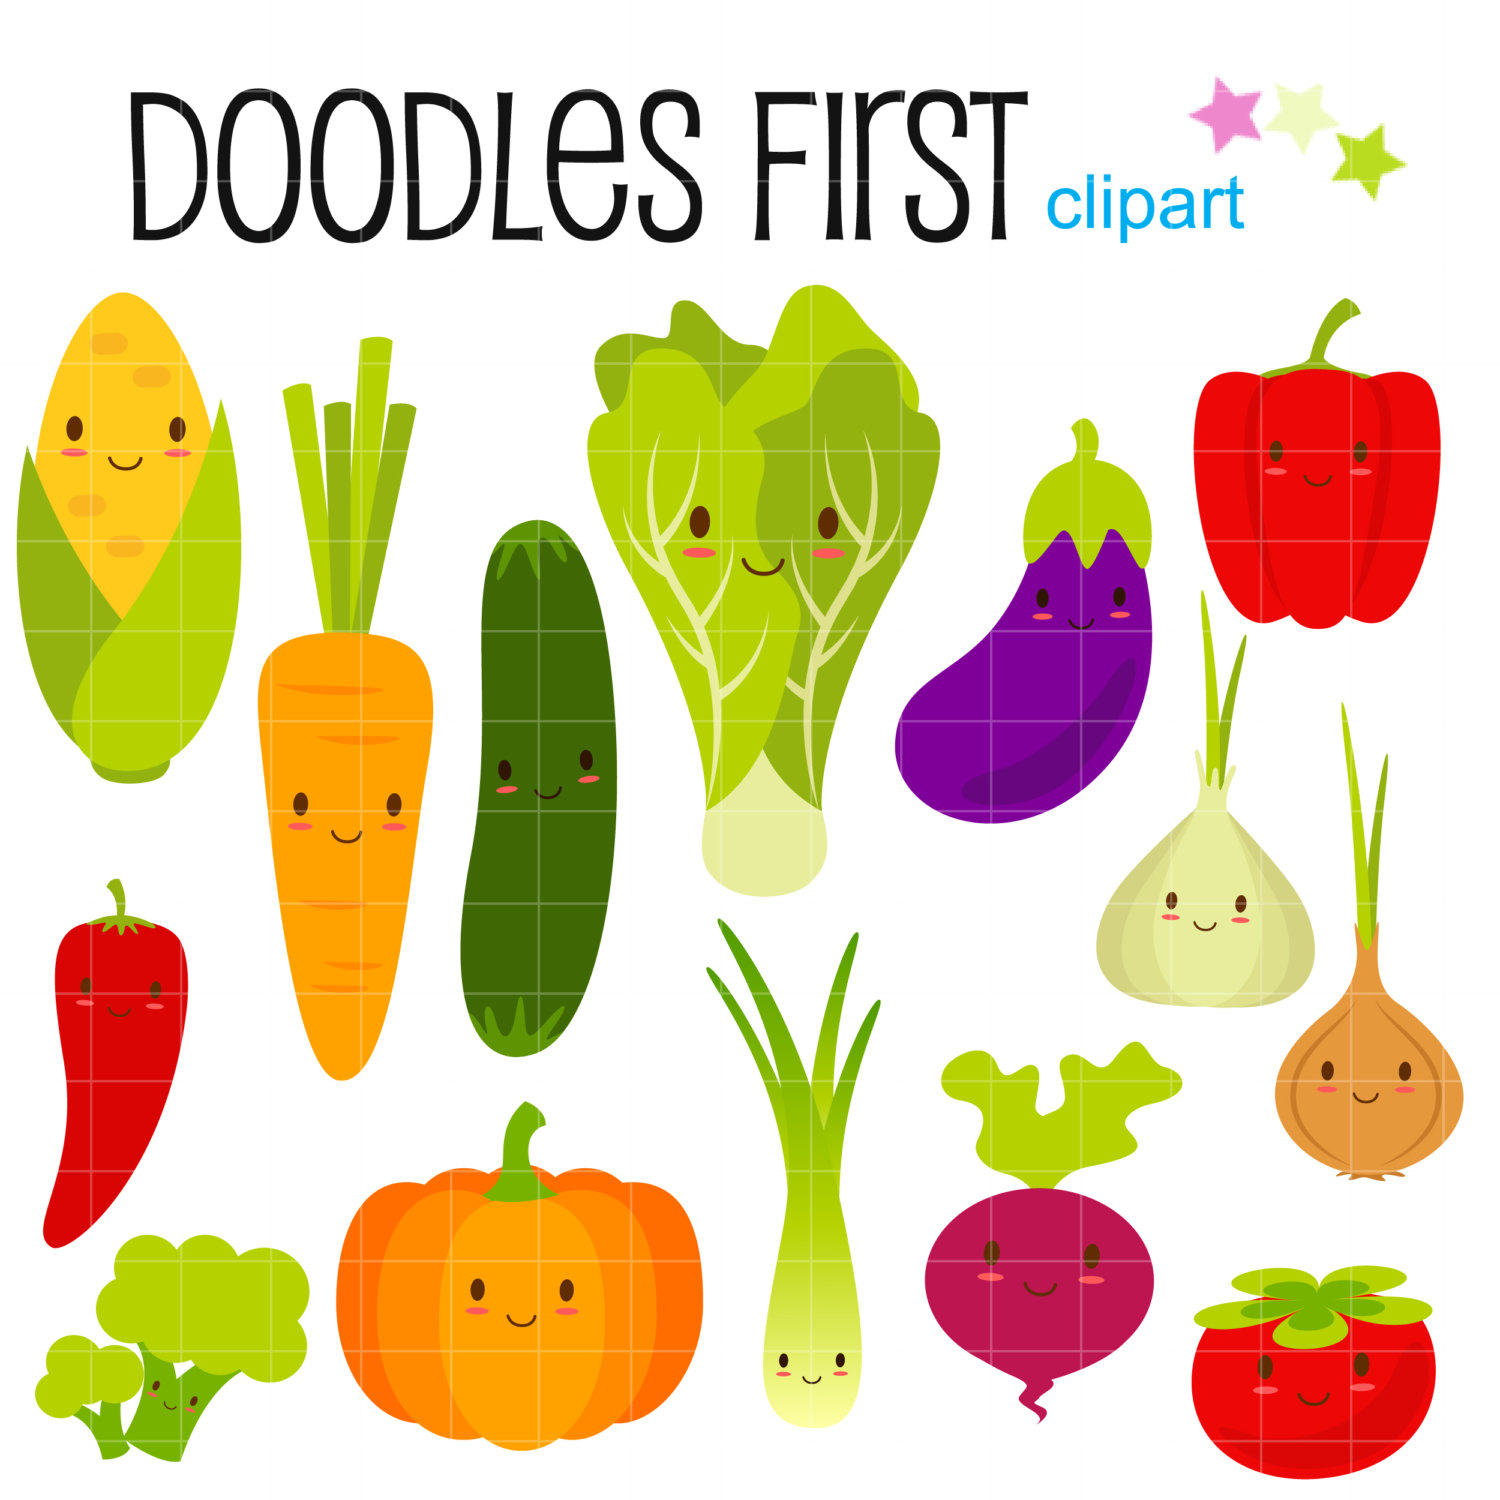 fruit and vegetable clipart